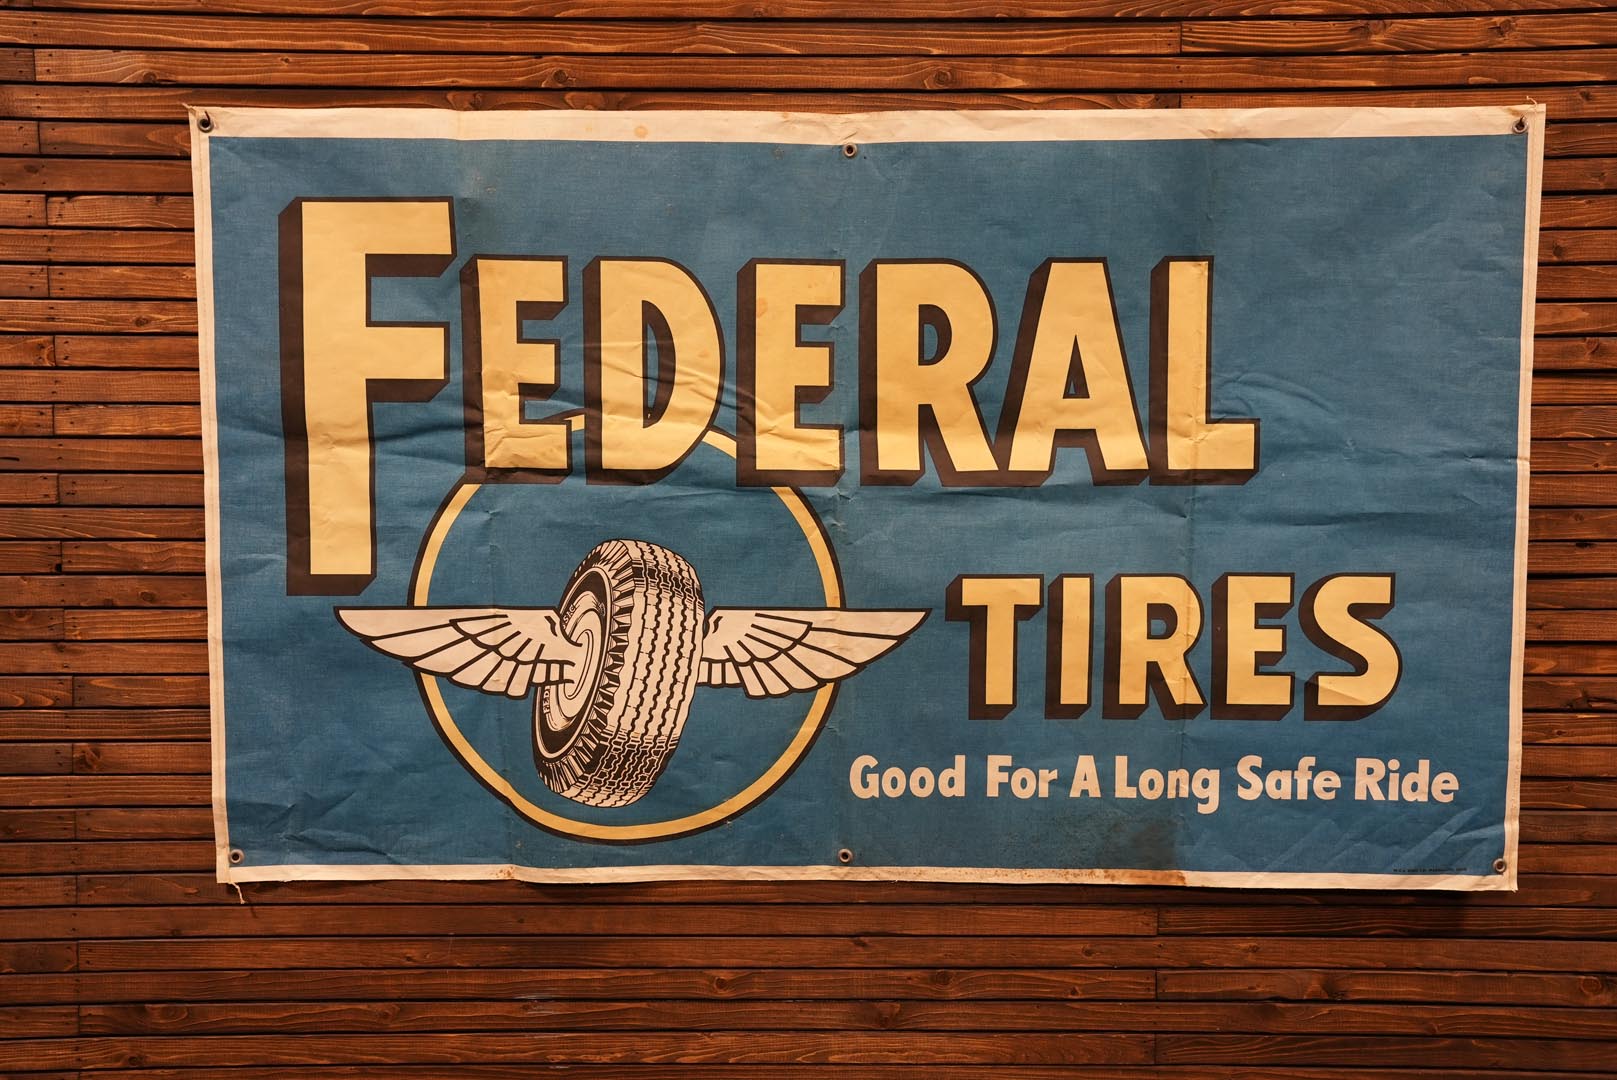  1960s Federal Tires Advertisin g Banner 